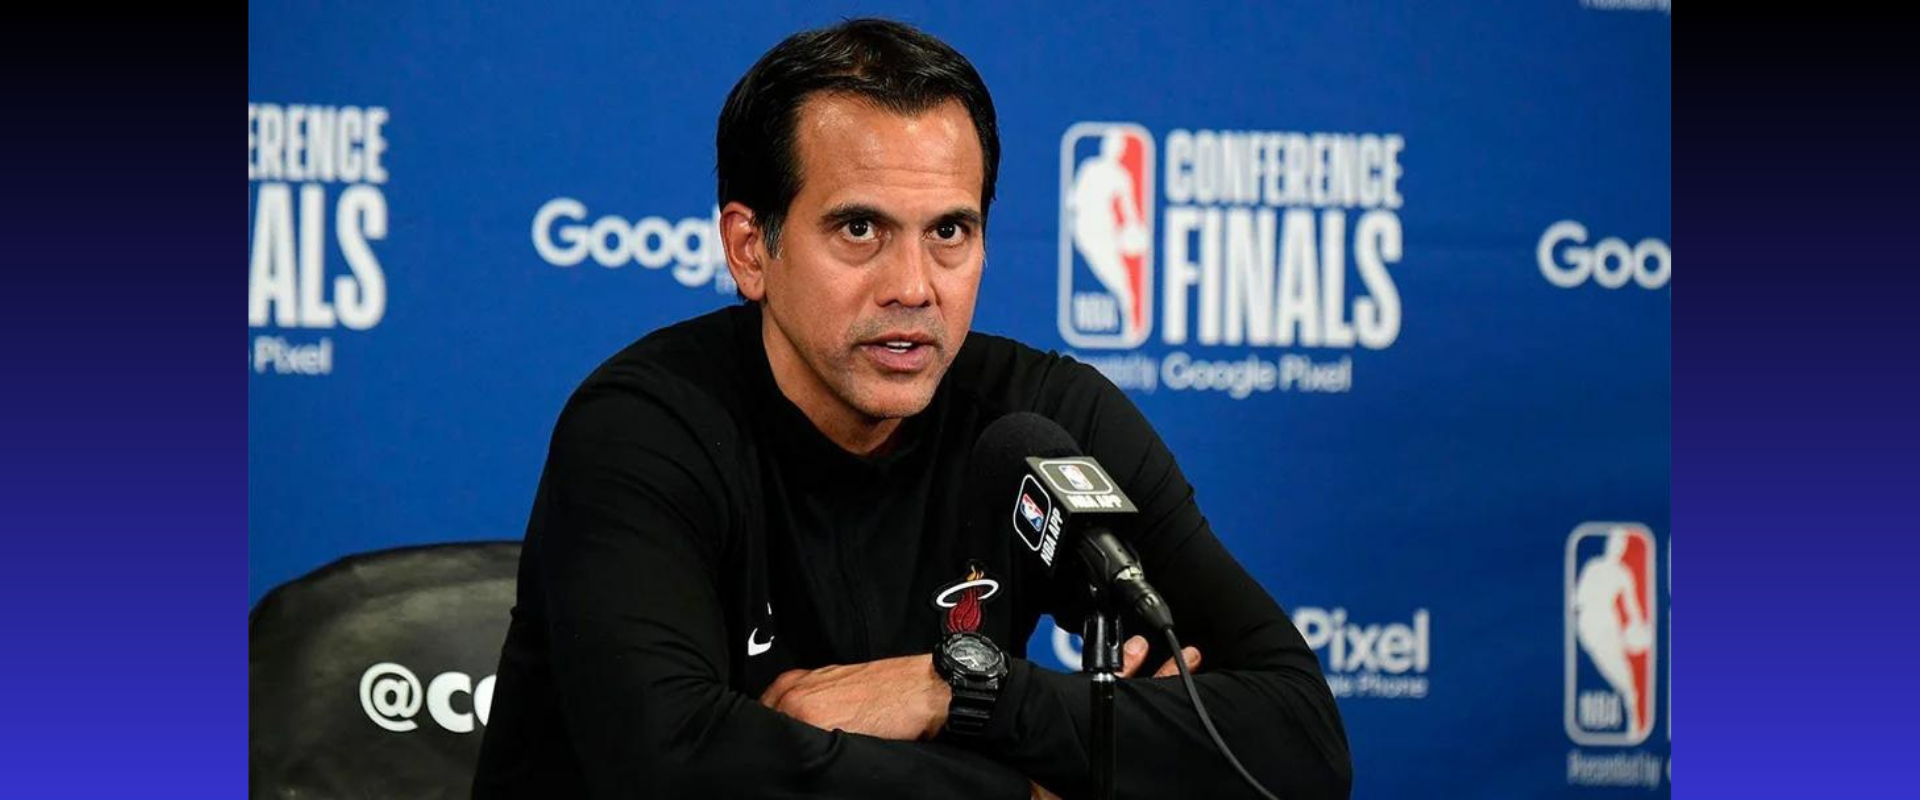 Heat's Erik Spoelstra-Play-in best thing for NBA in past decade